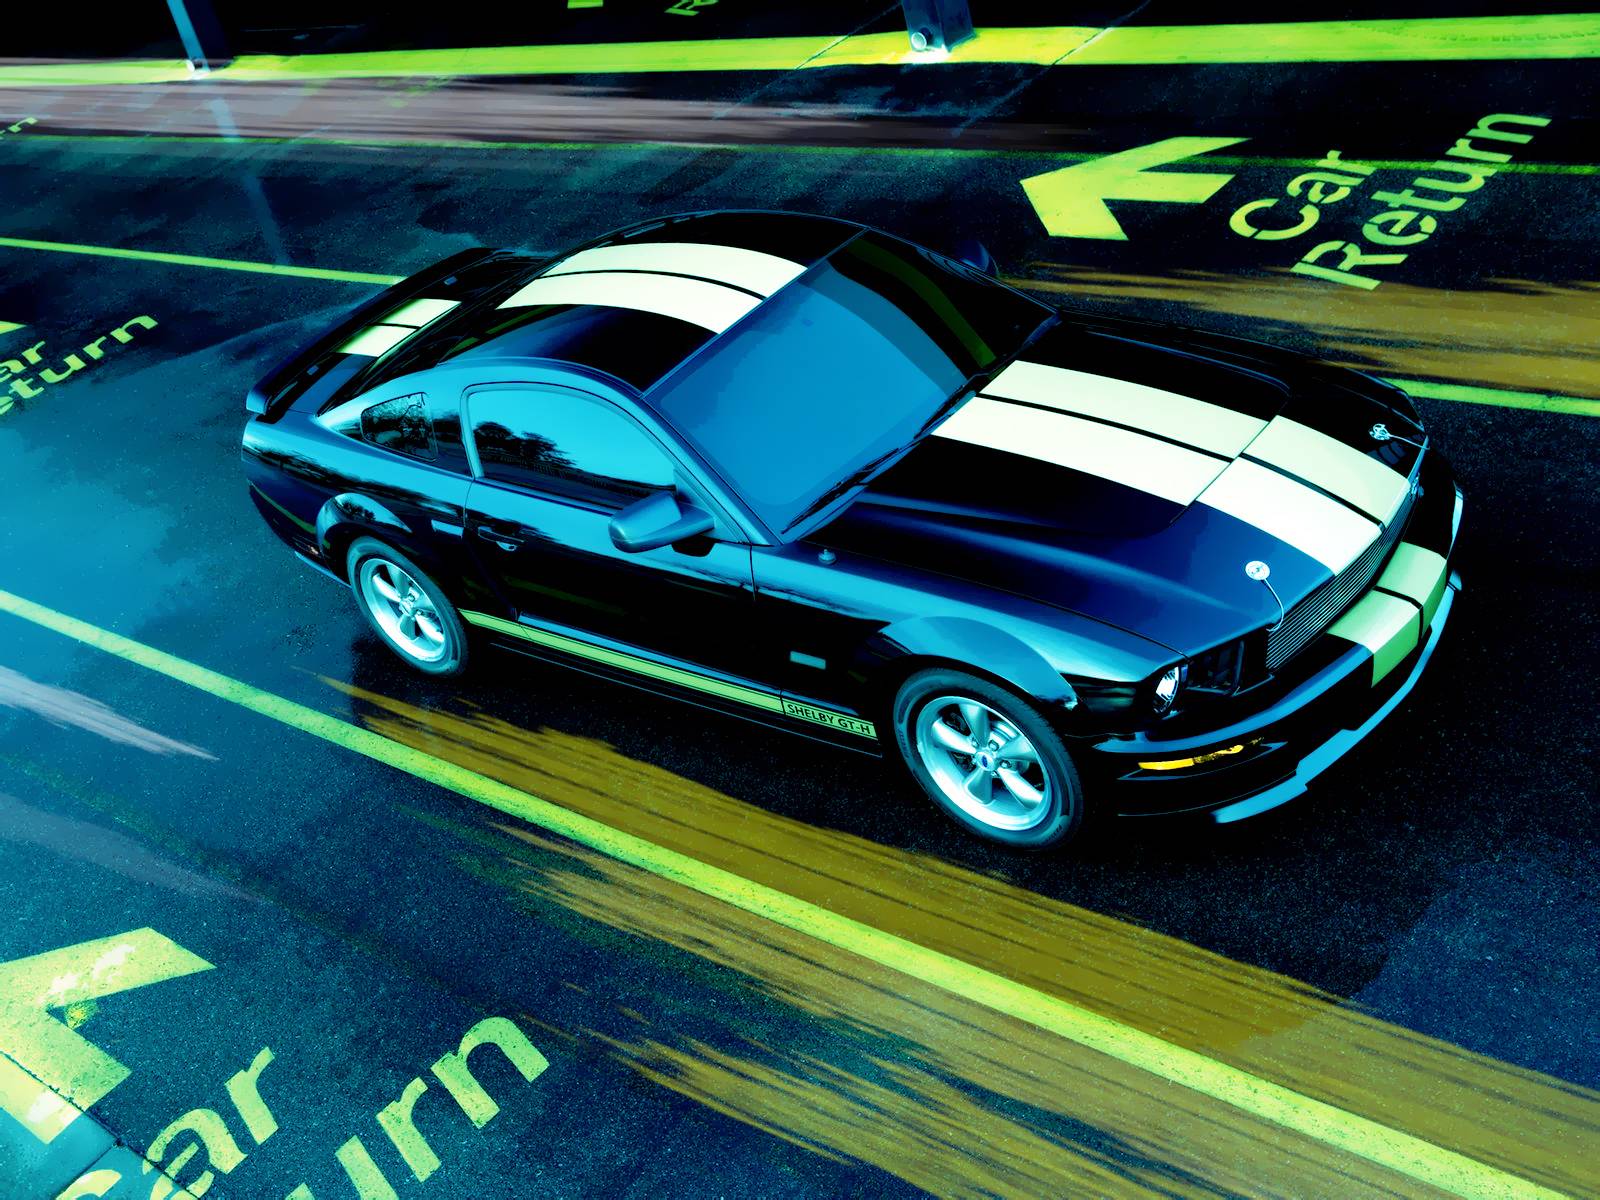 Ford Mustang Wallpaper 1799 1600x1200 px